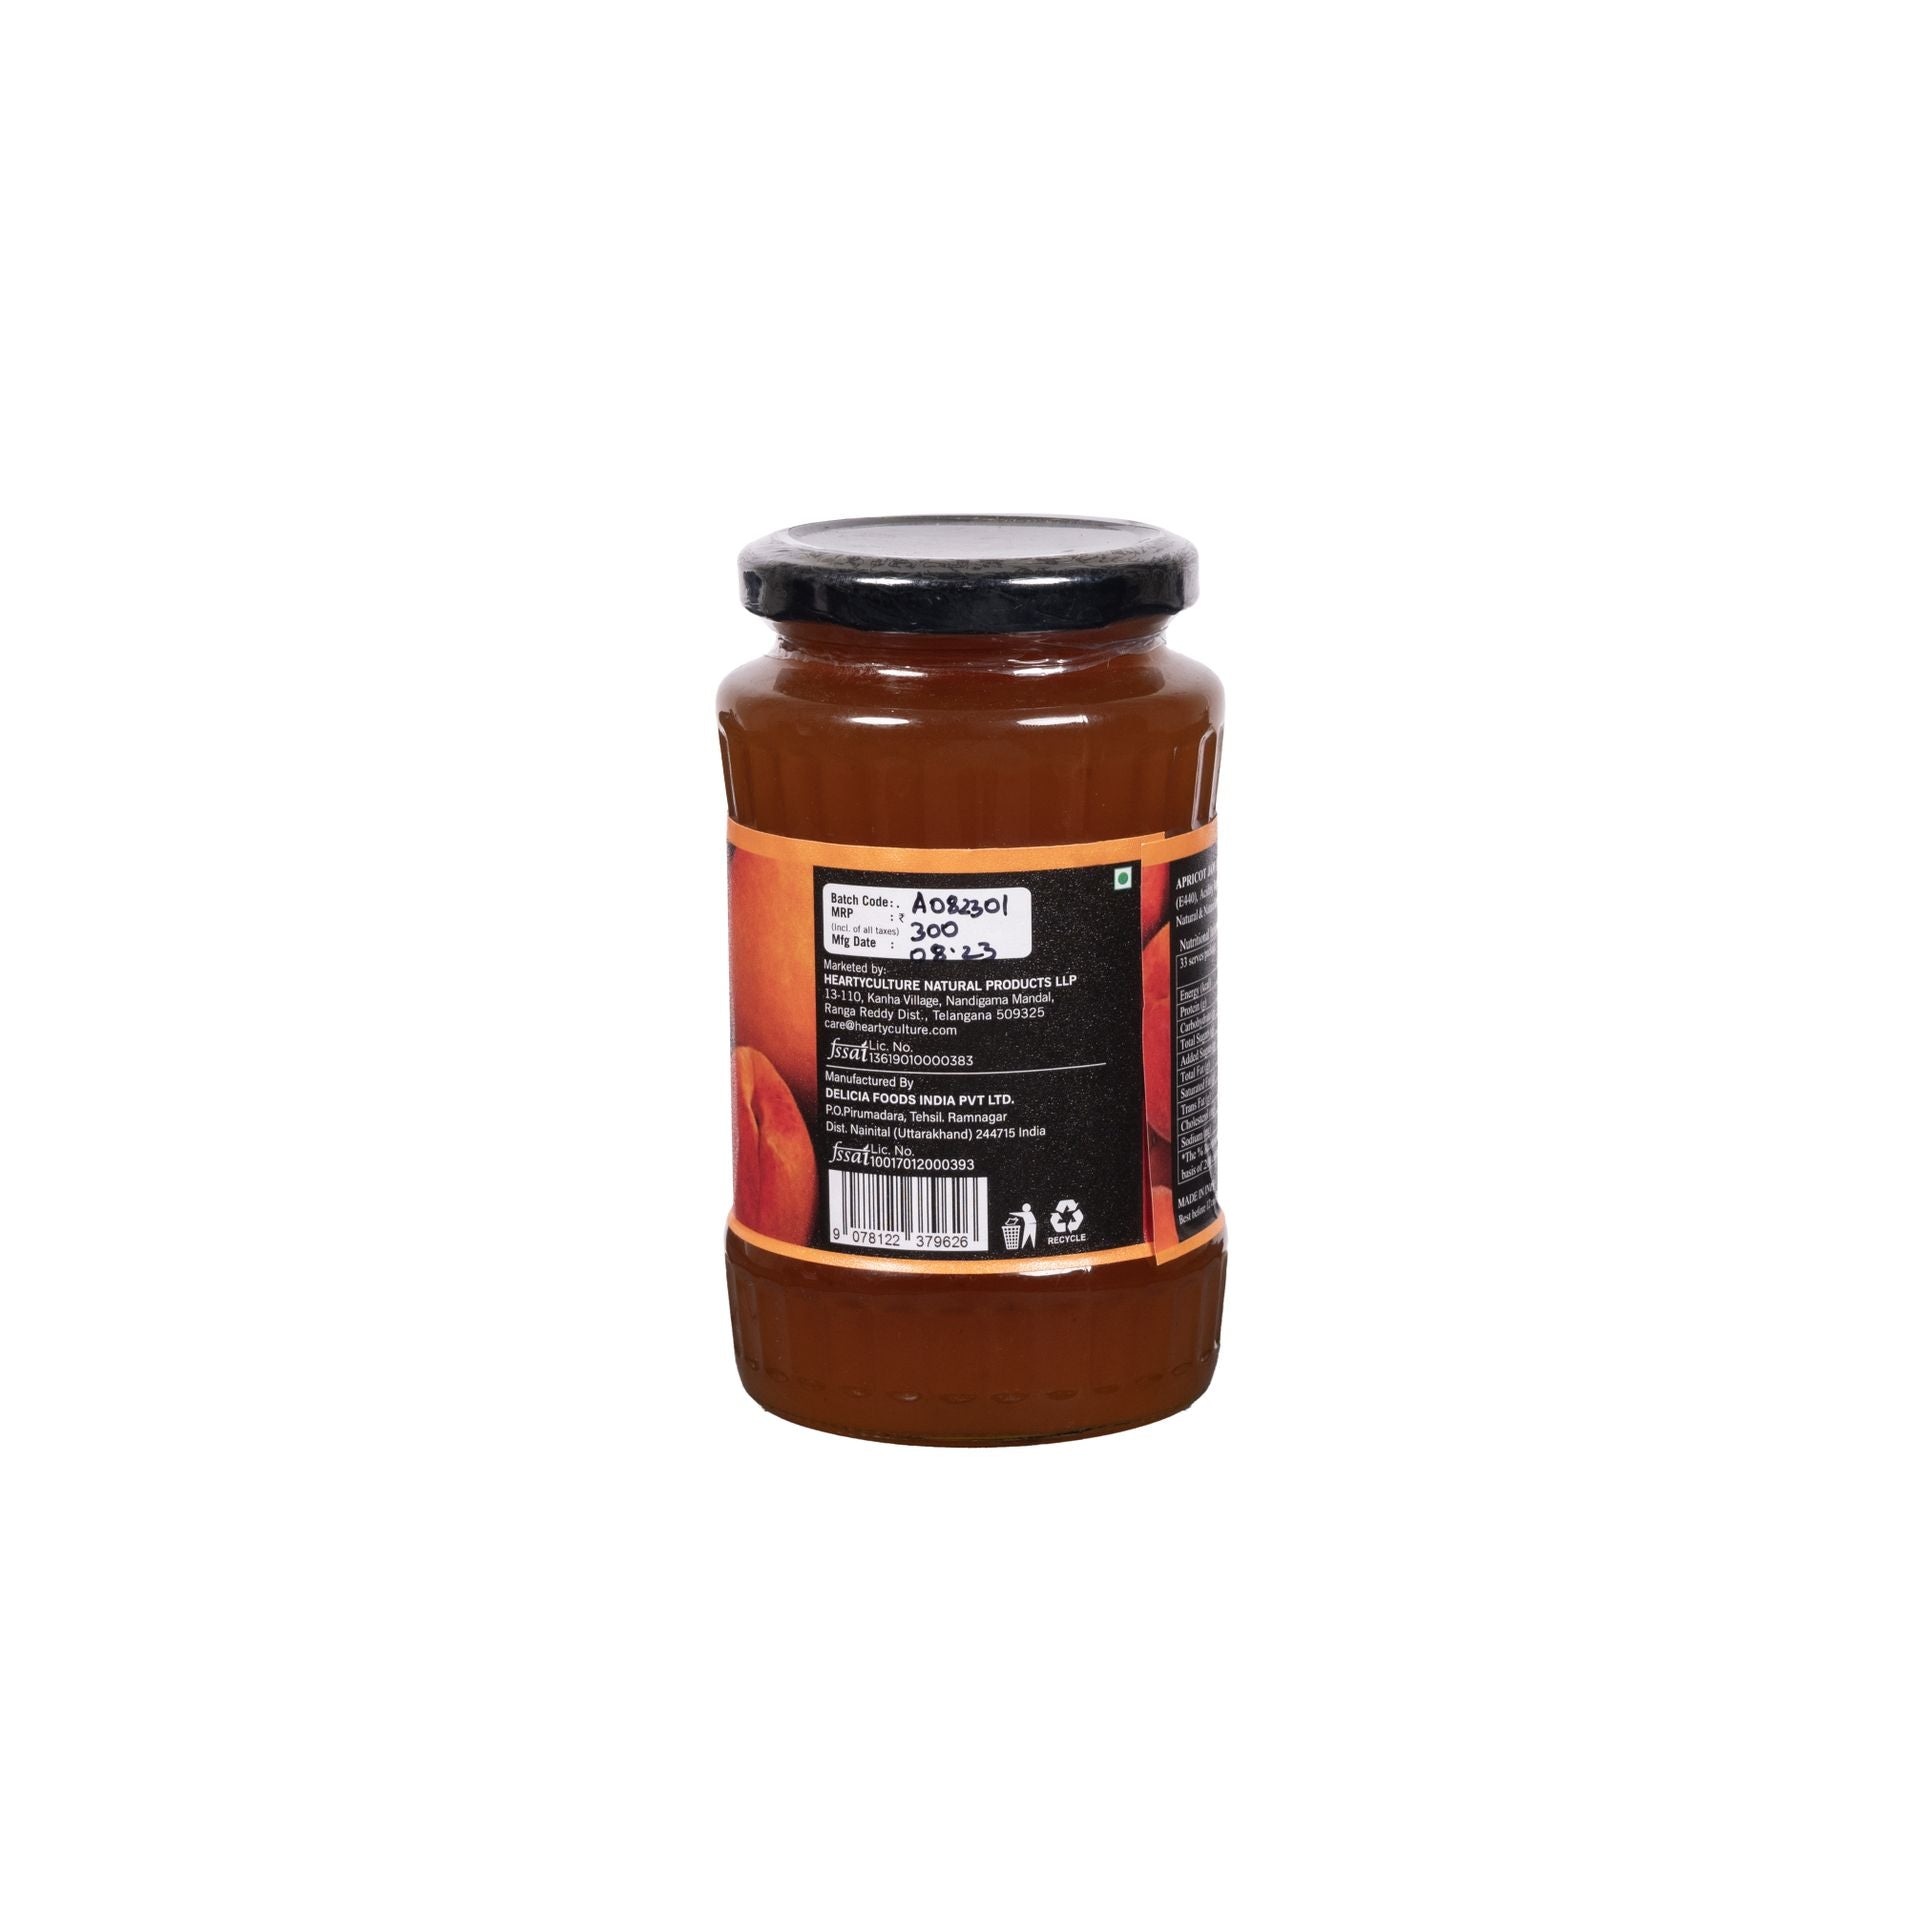 Heartyculture Apricot Jam 500 G